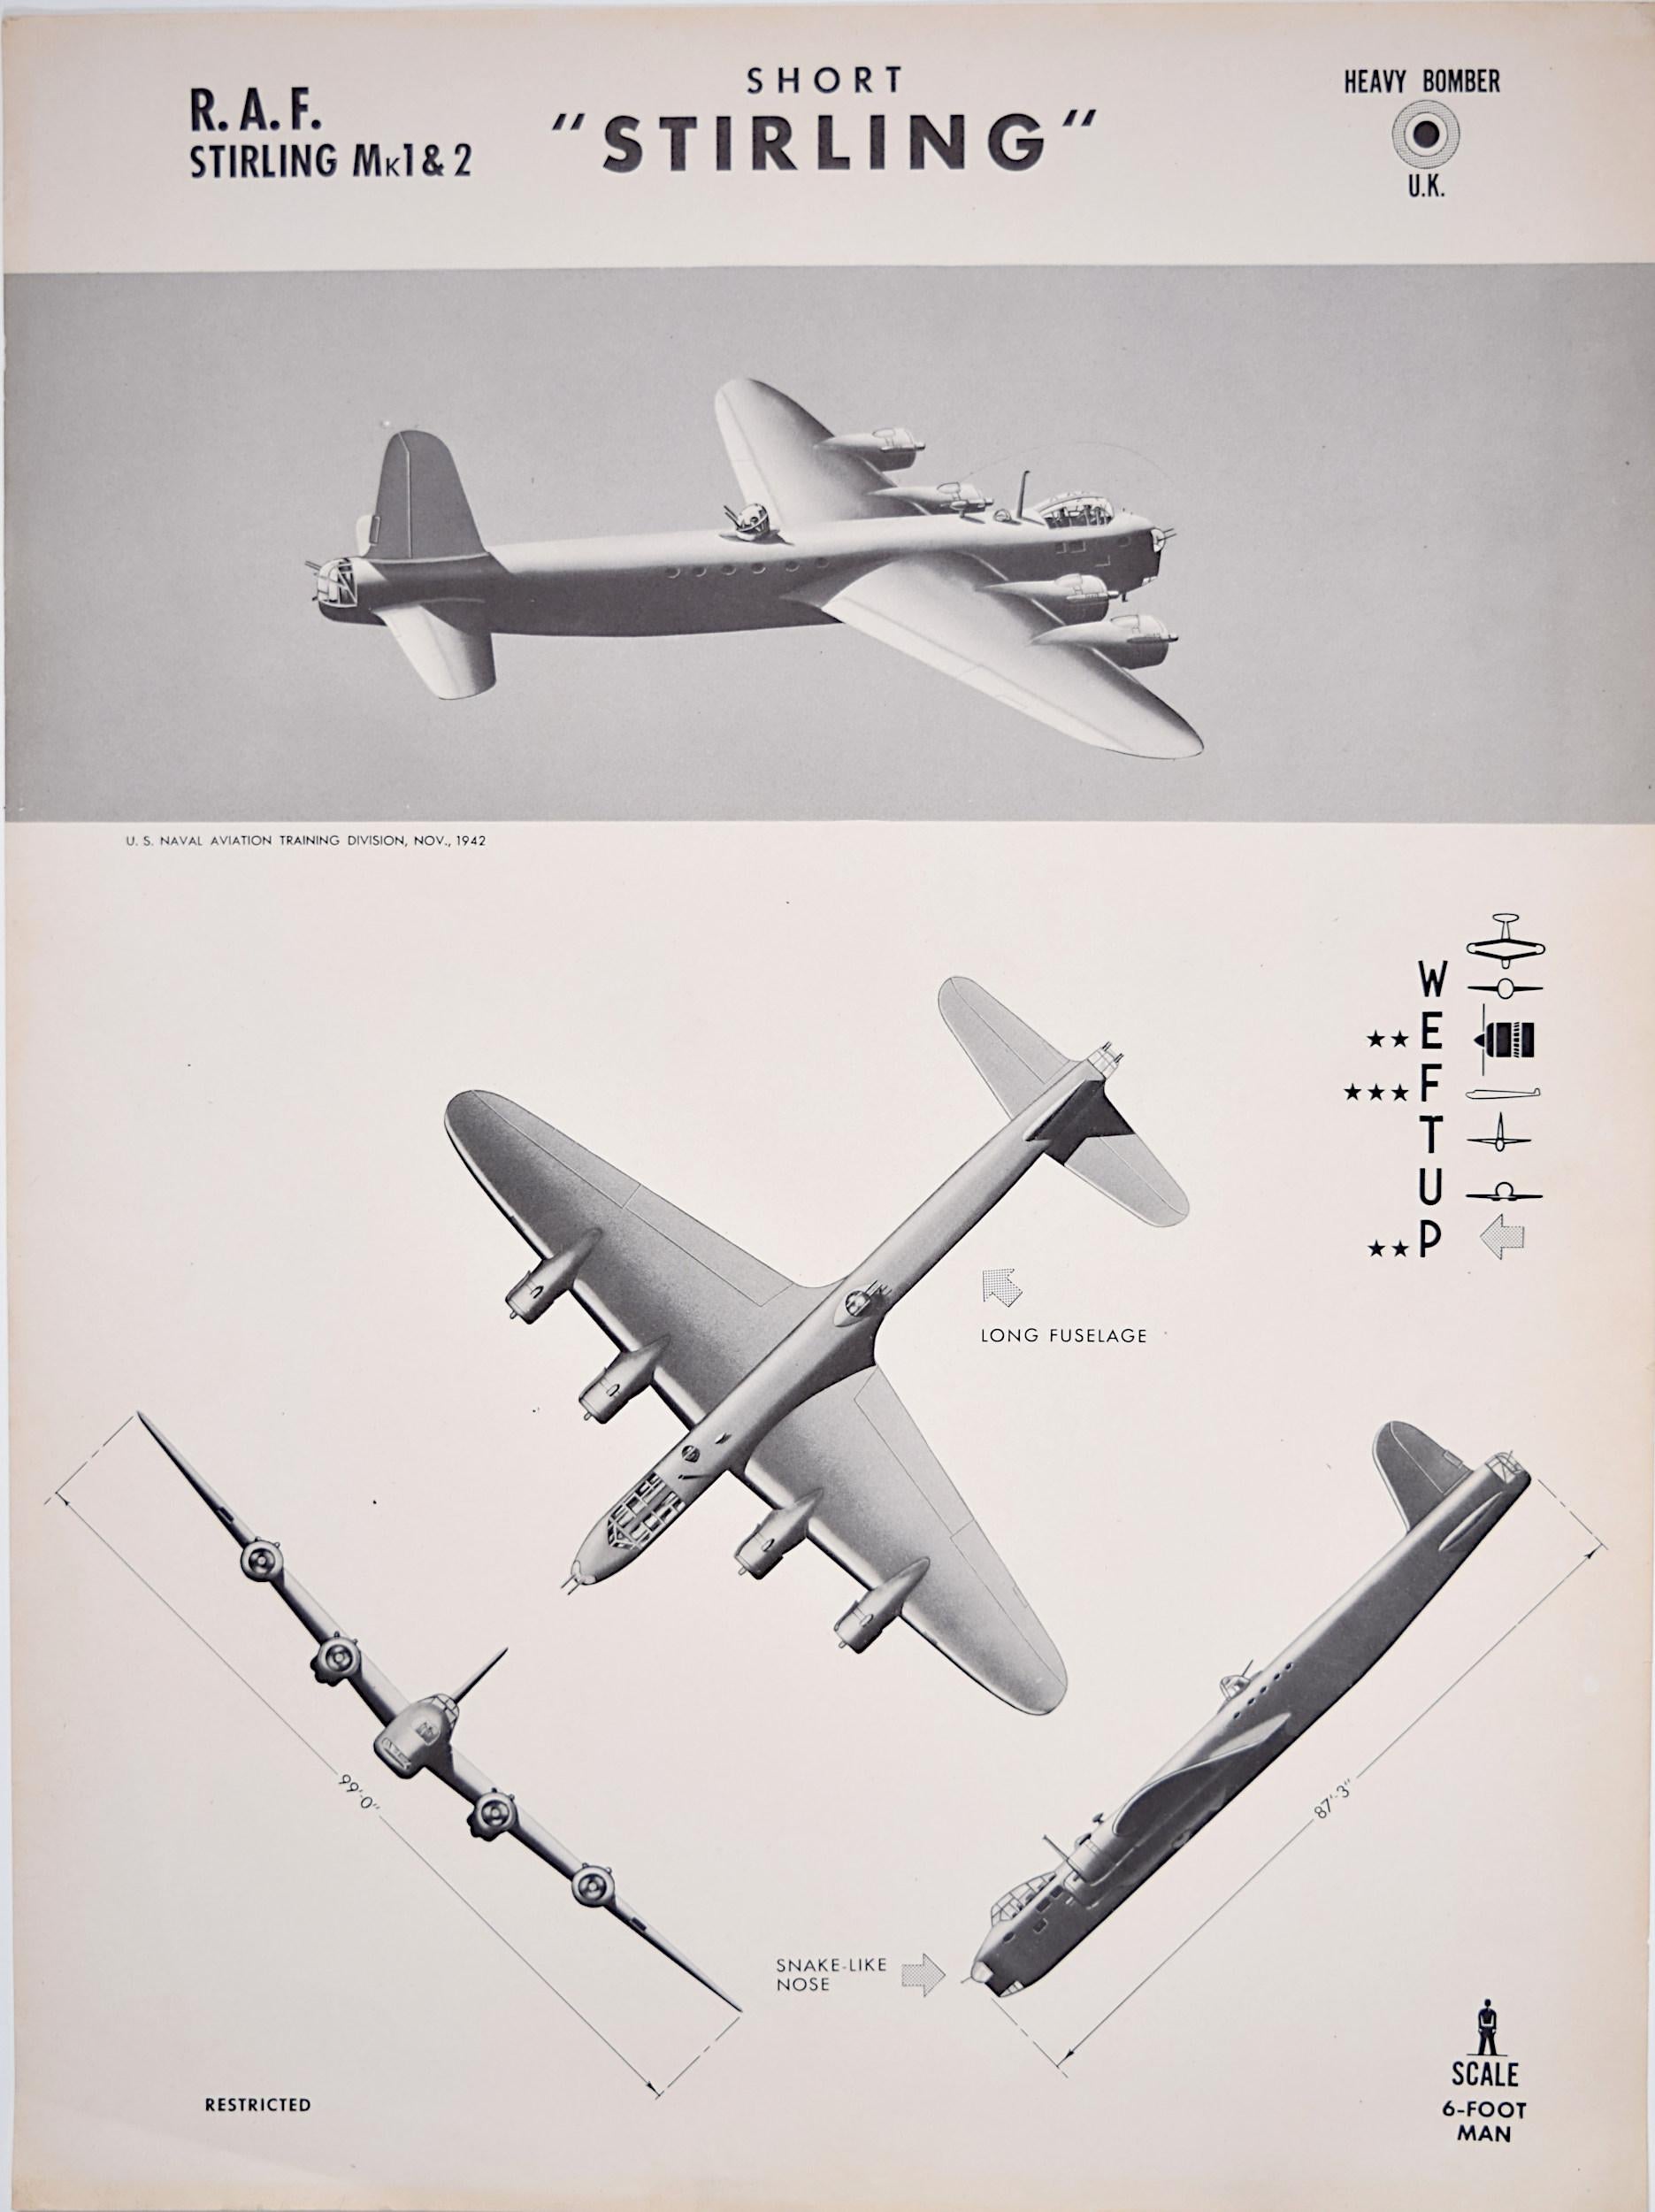 Unknown Print - 1943 Royal Air Force Short Stirling aeroplane recognition poster pub. US Navy